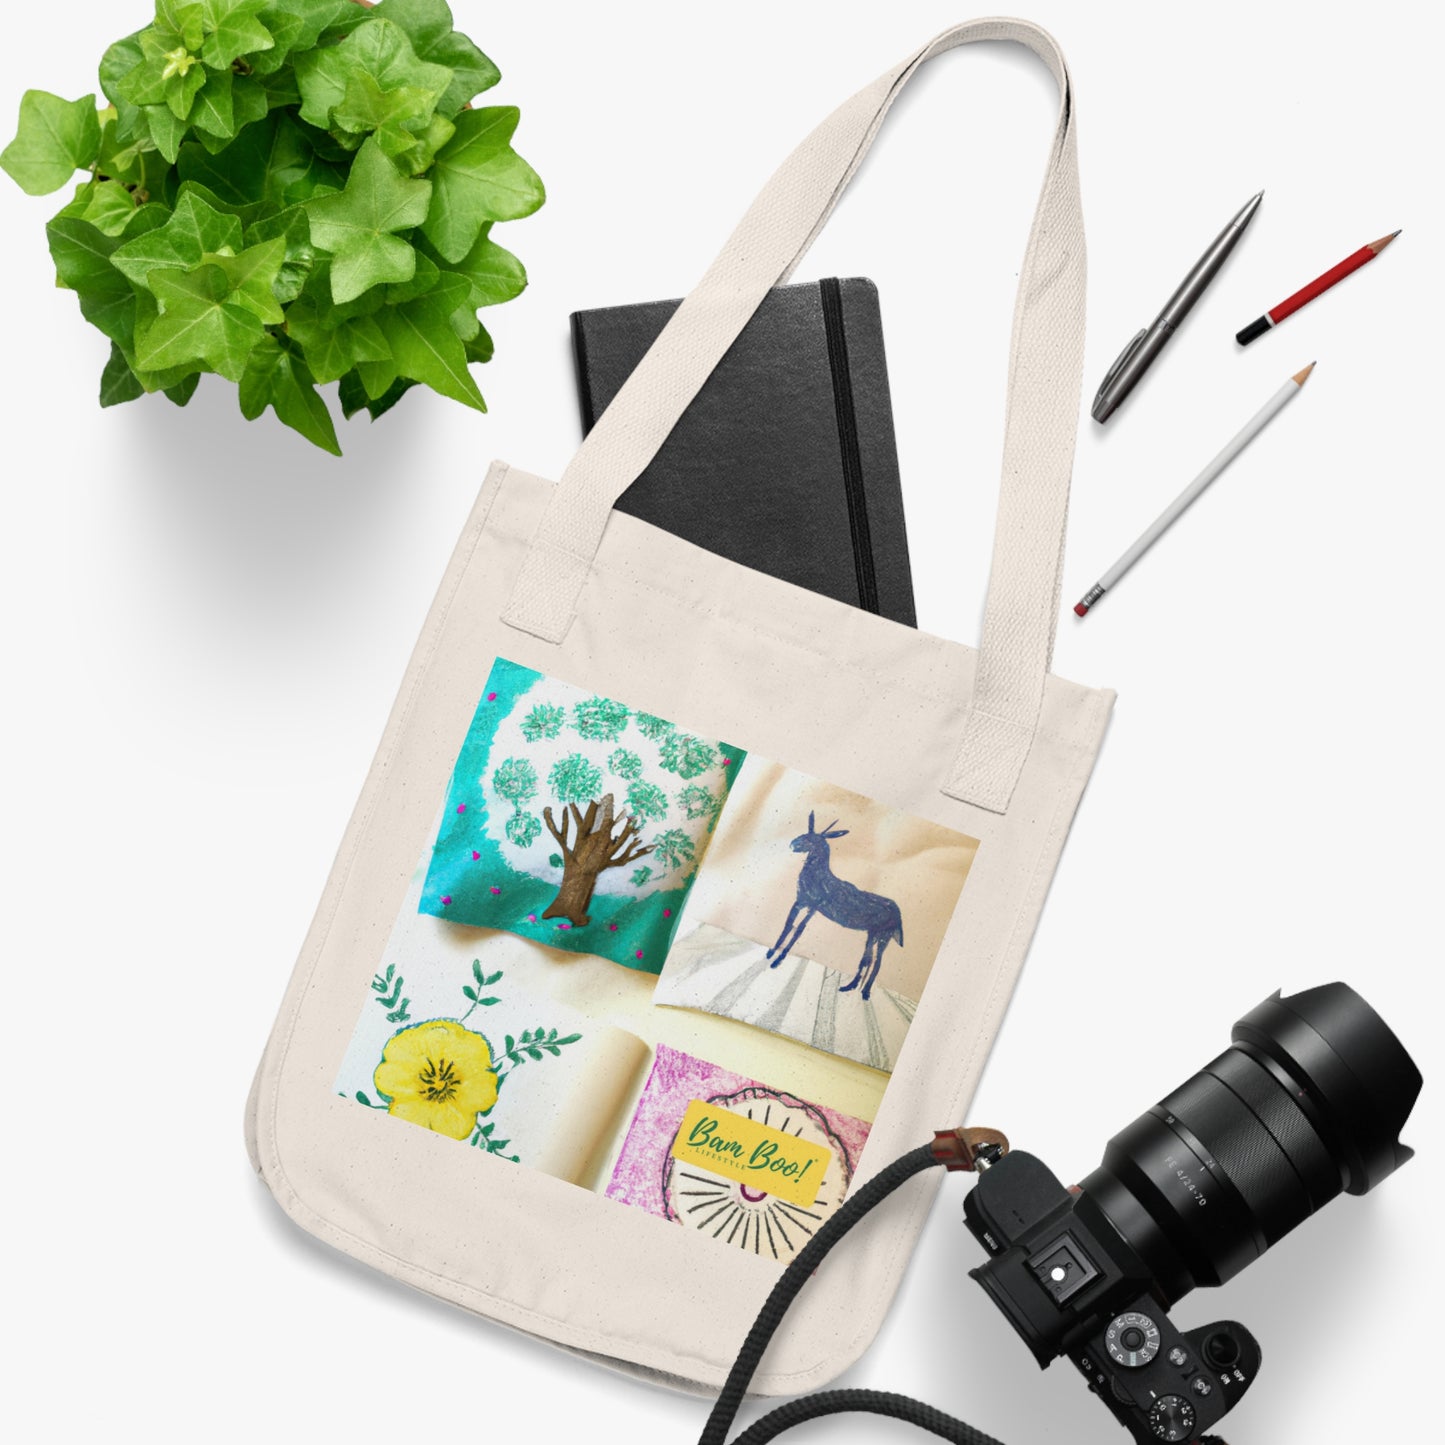 "My Story in Collage" - Bam Boo! Lifestyle Eco-friendly Tote Bag